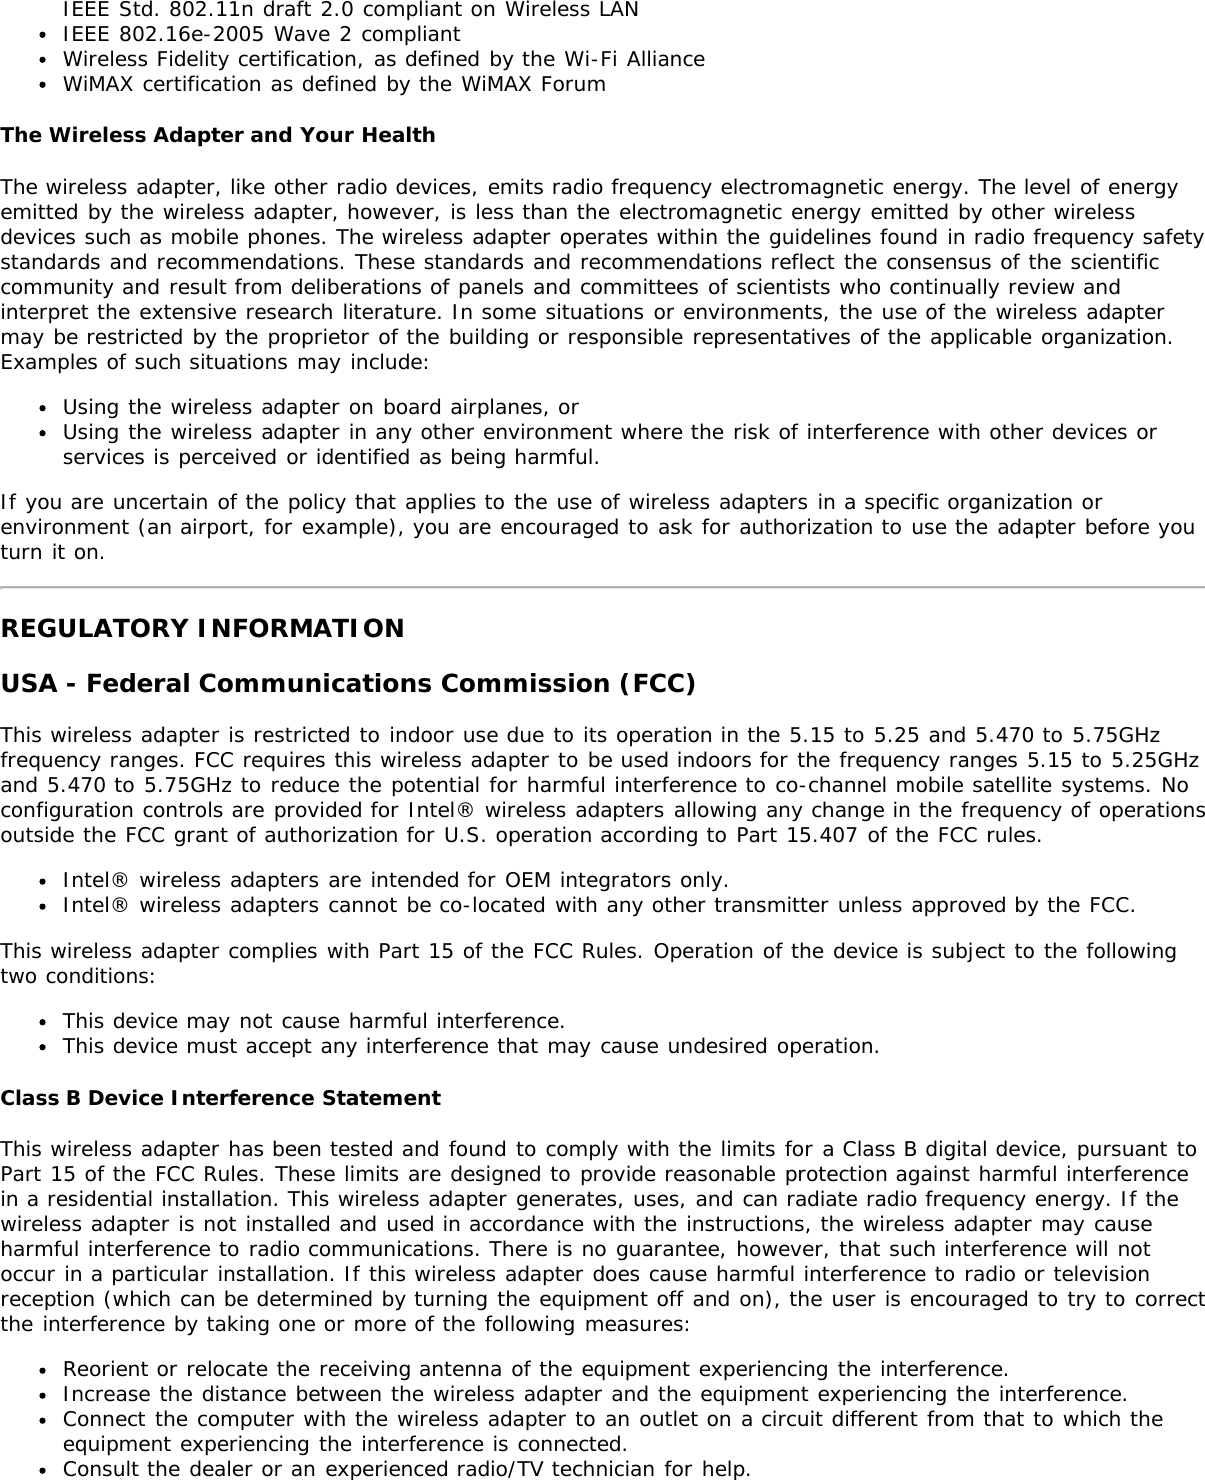 IEEE Std. 802.11n draft 2.0 compliant on Wireless LANIEEE 802.16e-2005 Wave 2 compliantWireless Fidelity certification, as defined by the Wi-Fi AllianceWiMAX certification as defined by the WiMAX ForumThe Wireless Adapter and Your HealthThe wireless adapter, like other radio devices, emits radio frequency electromagnetic energy. The level of energyemitted by the wireless adapter, however, is less than the electromagnetic energy emitted by other wirelessdevices such as mobile phones. The wireless adapter operates within the guidelines found in radio frequency safetystandards and recommendations. These standards and recommendations reflect the consensus of the scientificcommunity and result from deliberations of panels and committees of scientists who continually review andinterpret the extensive research literature. In some situations or environments, the use of the wireless adaptermay be restricted by the proprietor of the building or responsible representatives of the applicable organization.Examples of such situations may include:Using the wireless adapter on board airplanes, orUsing the wireless adapter in any other environment where the risk of interference with other devices orservices is perceived or identified as being harmful.If you are uncertain of the policy that applies to the use of wireless adapters in a specific organization orenvironment (an airport, for example), you are encouraged to ask for authorization to use the adapter before youturn it on.REGULATORY INFORMATIONUSA - Federal Communications Commission (FCC)This wireless adapter is restricted to indoor use due to its operation in the 5.15 to 5.25 and 5.470 to 5.75GHzfrequency ranges. FCC requires this wireless adapter to be used indoors for the frequency ranges 5.15 to 5.25GHzand 5.470 to 5.75GHz to reduce the potential for harmful interference to co-channel mobile satellite systems. Noconfiguration controls are provided for Intel® wireless adapters allowing any change in the frequency of operationsoutside the FCC grant of authorization for U.S. operation according to Part 15.407 of the FCC rules.Intel® wireless adapters are intended for OEM integrators only.Intel® wireless adapters cannot be co-located with any other transmitter unless approved by the FCC.This wireless adapter complies with Part 15 of the FCC Rules. Operation of the device is subject to the followingtwo conditions:This device may not cause harmful interference.This device must accept any interference that may cause undesired operation.Class B Device Interference StatementThis wireless adapter has been tested and found to comply with the limits for a Class B digital device, pursuant toPart 15 of the FCC Rules. These limits are designed to provide reasonable protection against harmful interferencein a residential installation. This wireless adapter generates, uses, and can radiate radio frequency energy. If thewireless adapter is not installed and used in accordance with the instructions, the wireless adapter may causeharmful interference to radio communications. There is no guarantee, however, that such interference will notoccur in a particular installation. If this wireless adapter does cause harmful interference to radio or televisionreception (which can be determined by turning the equipment off and on), the user is encouraged to try to correctthe interference by taking one or more of the following measures:Reorient or relocate the receiving antenna of the equipment experiencing the interference.Increase the distance between the wireless adapter and the equipment experiencing the interference.Connect the computer with the wireless adapter to an outlet on a circuit different from that to which theequipment experiencing the interference is connected.Consult the dealer or an experienced radio/TV technician for help.